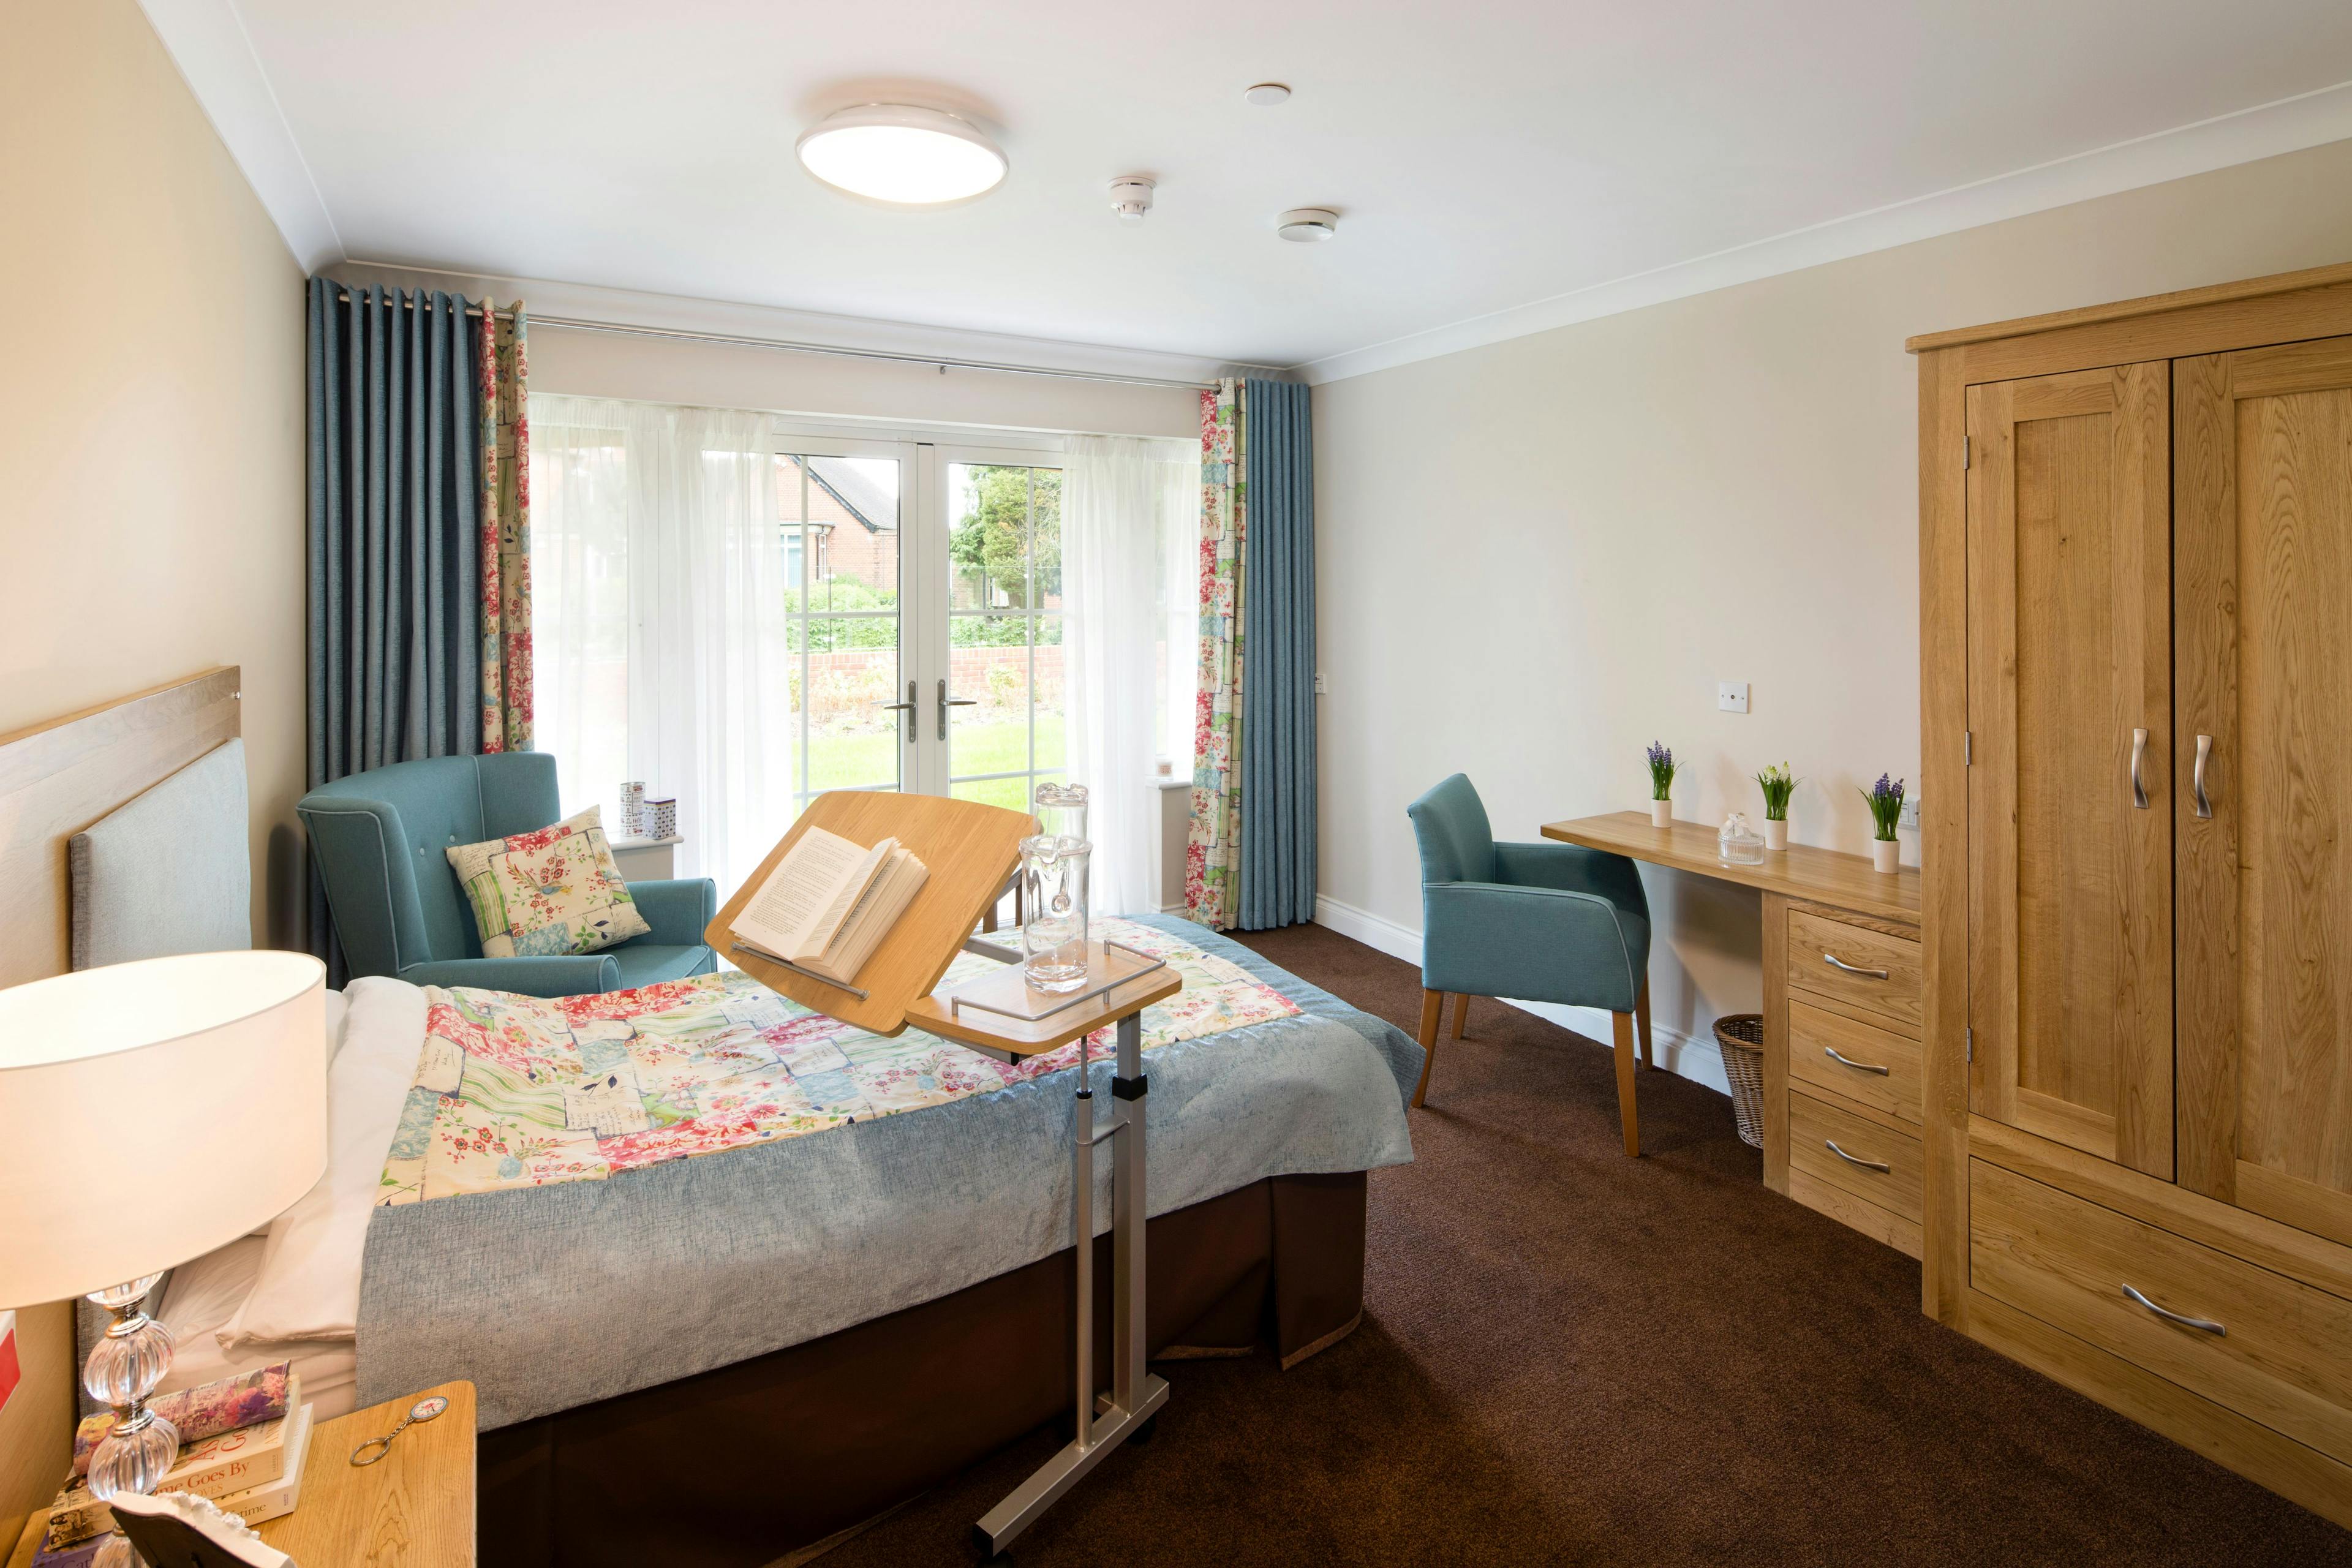 Porthaven Care Homes - Woodland Manor care home 2